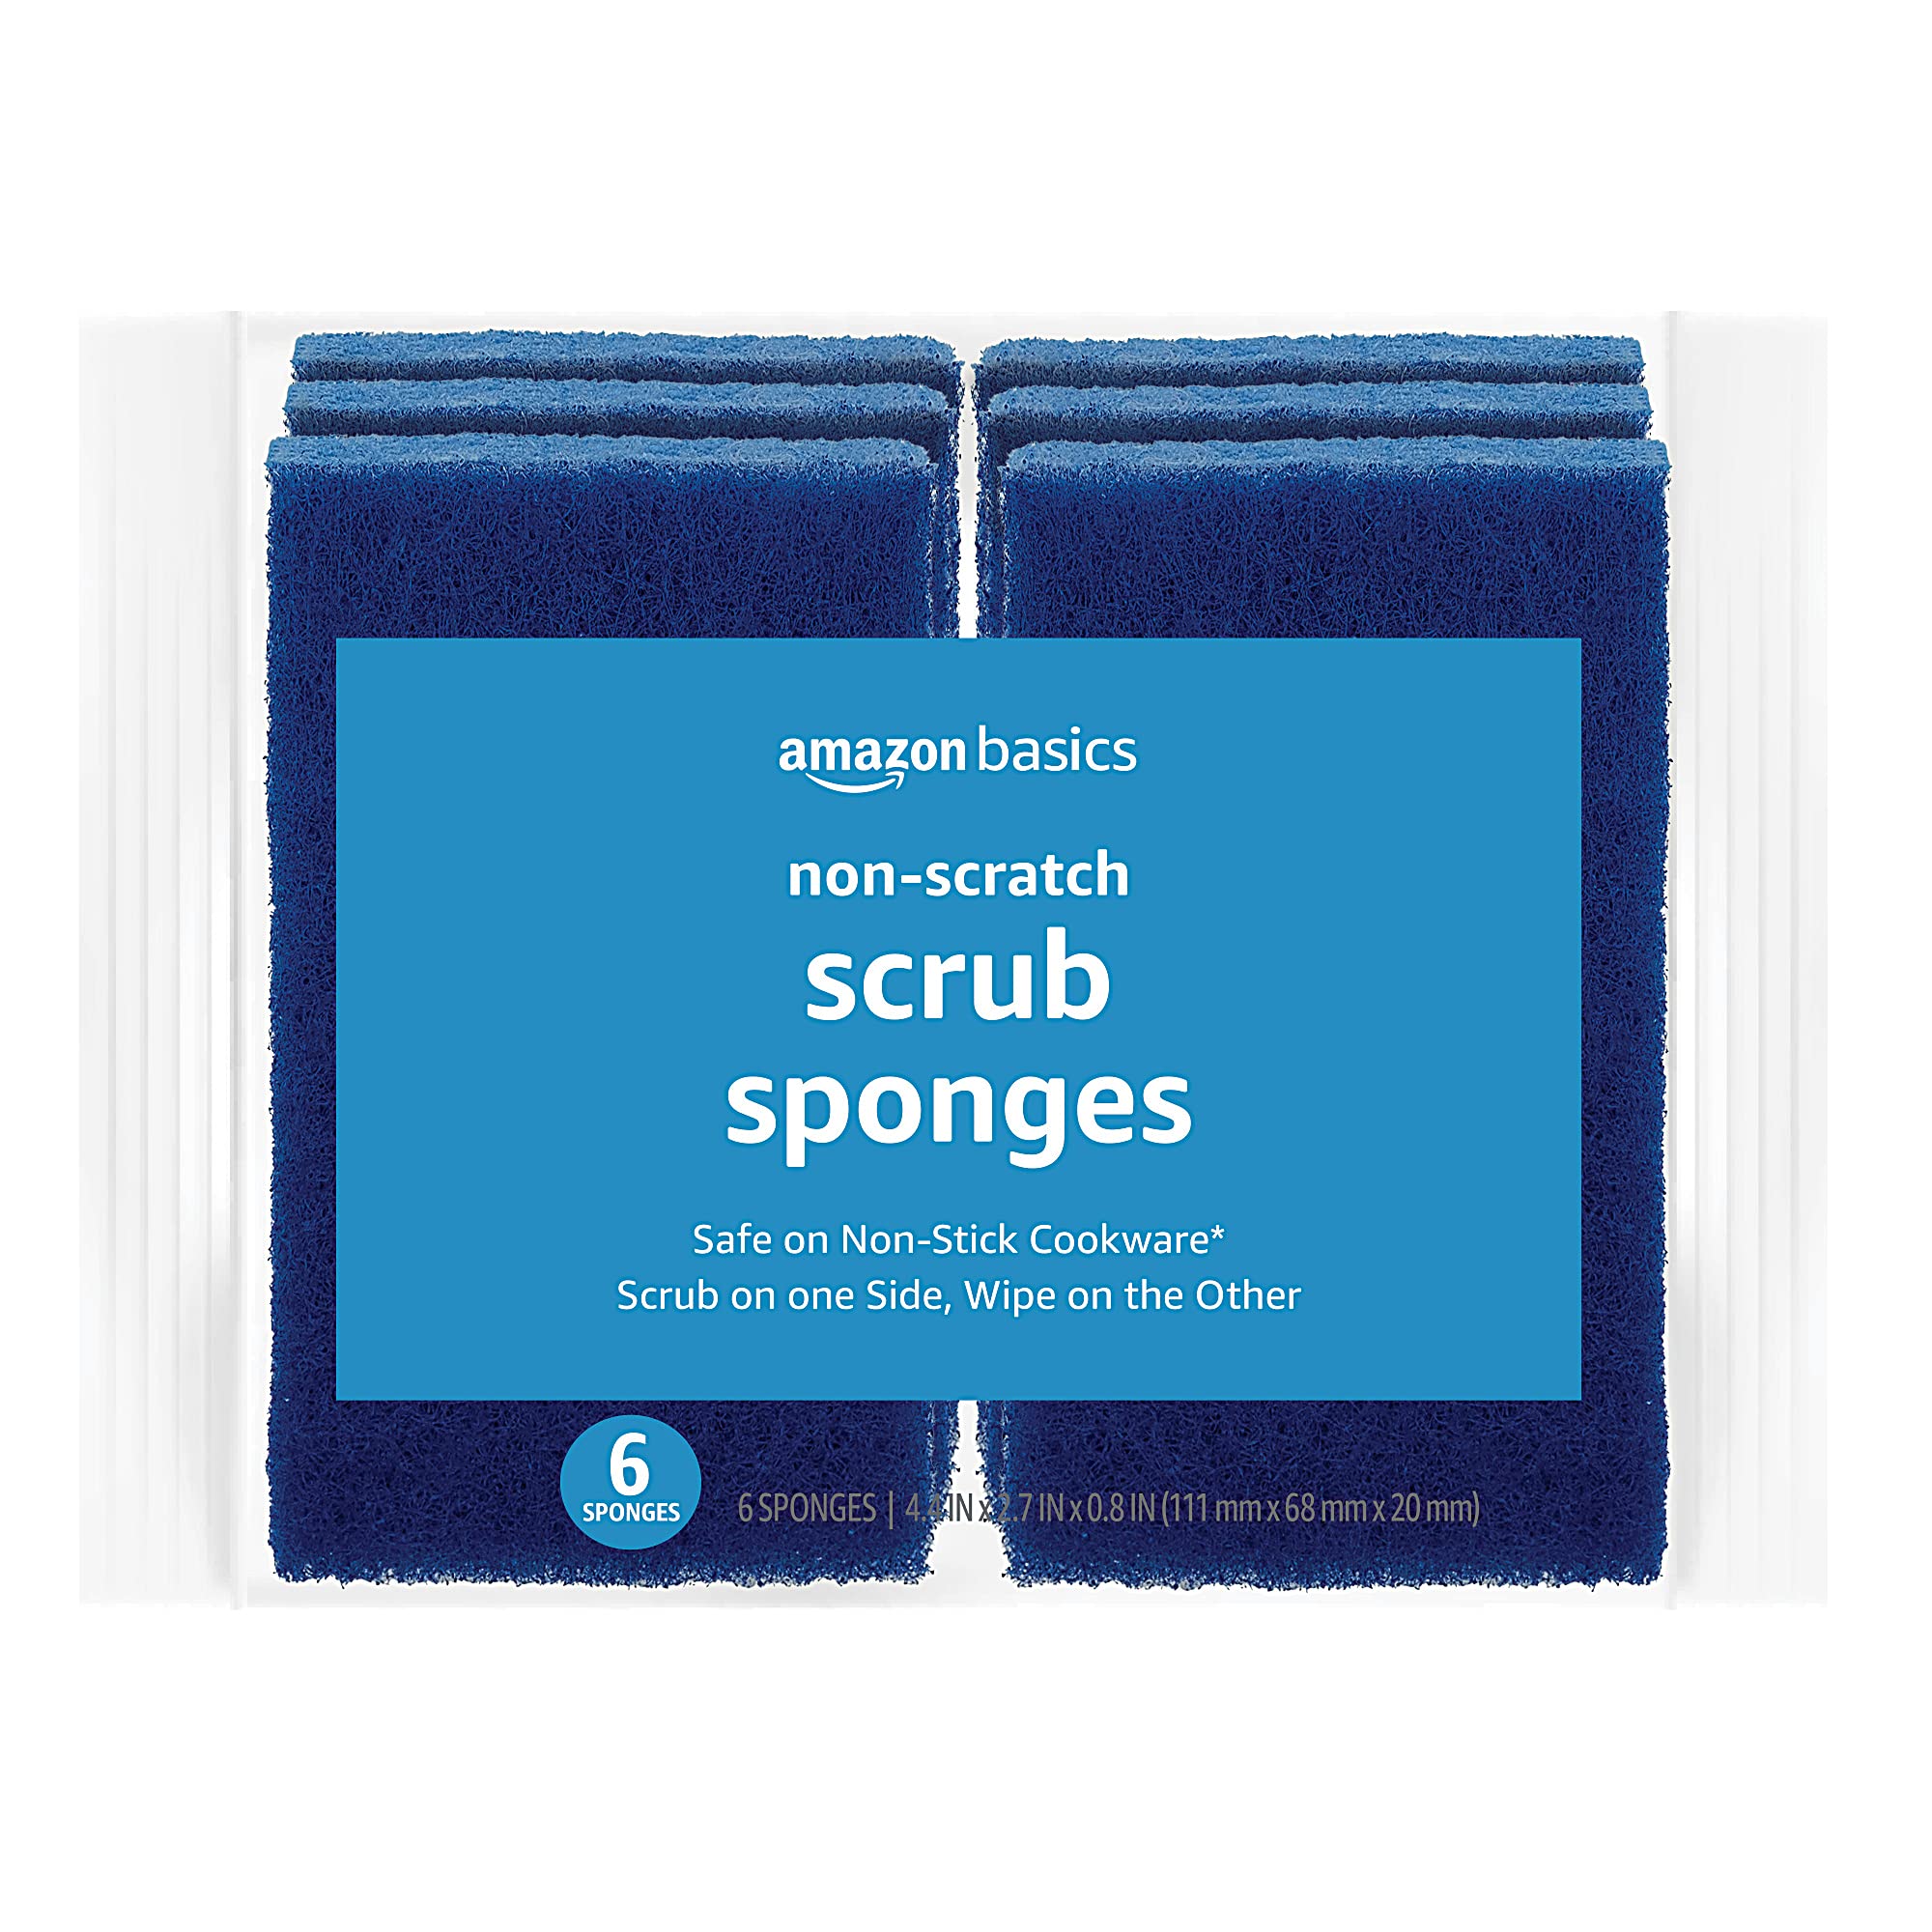 Amazon Prime Members: 6-Pack Amazon Basics Scrub Sponges (Non-Scratch or Heavy Duty) $3.38 + Free Shipping w/ Prime or on $25+